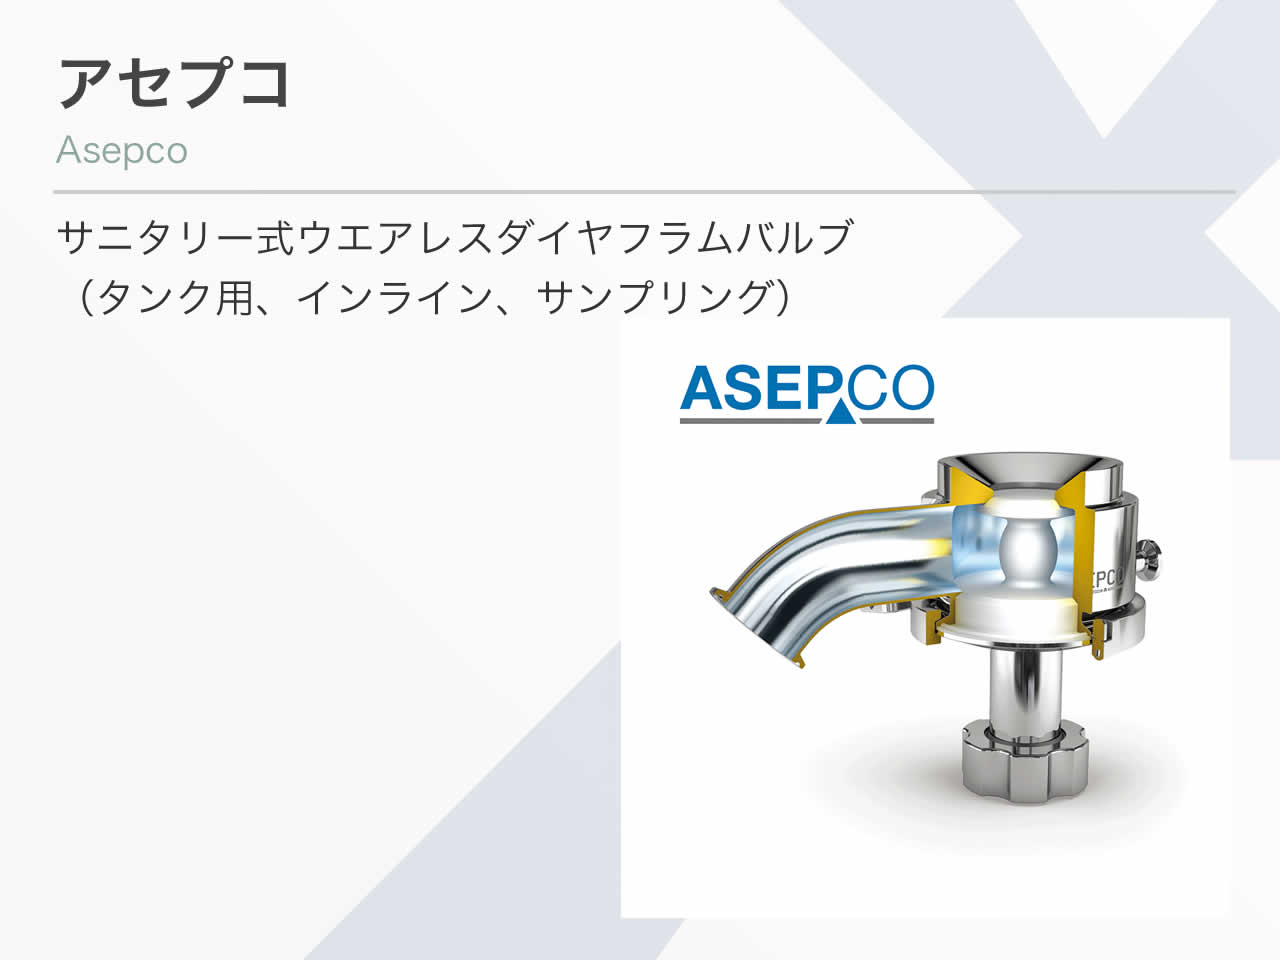 Asepco（アセプコ）